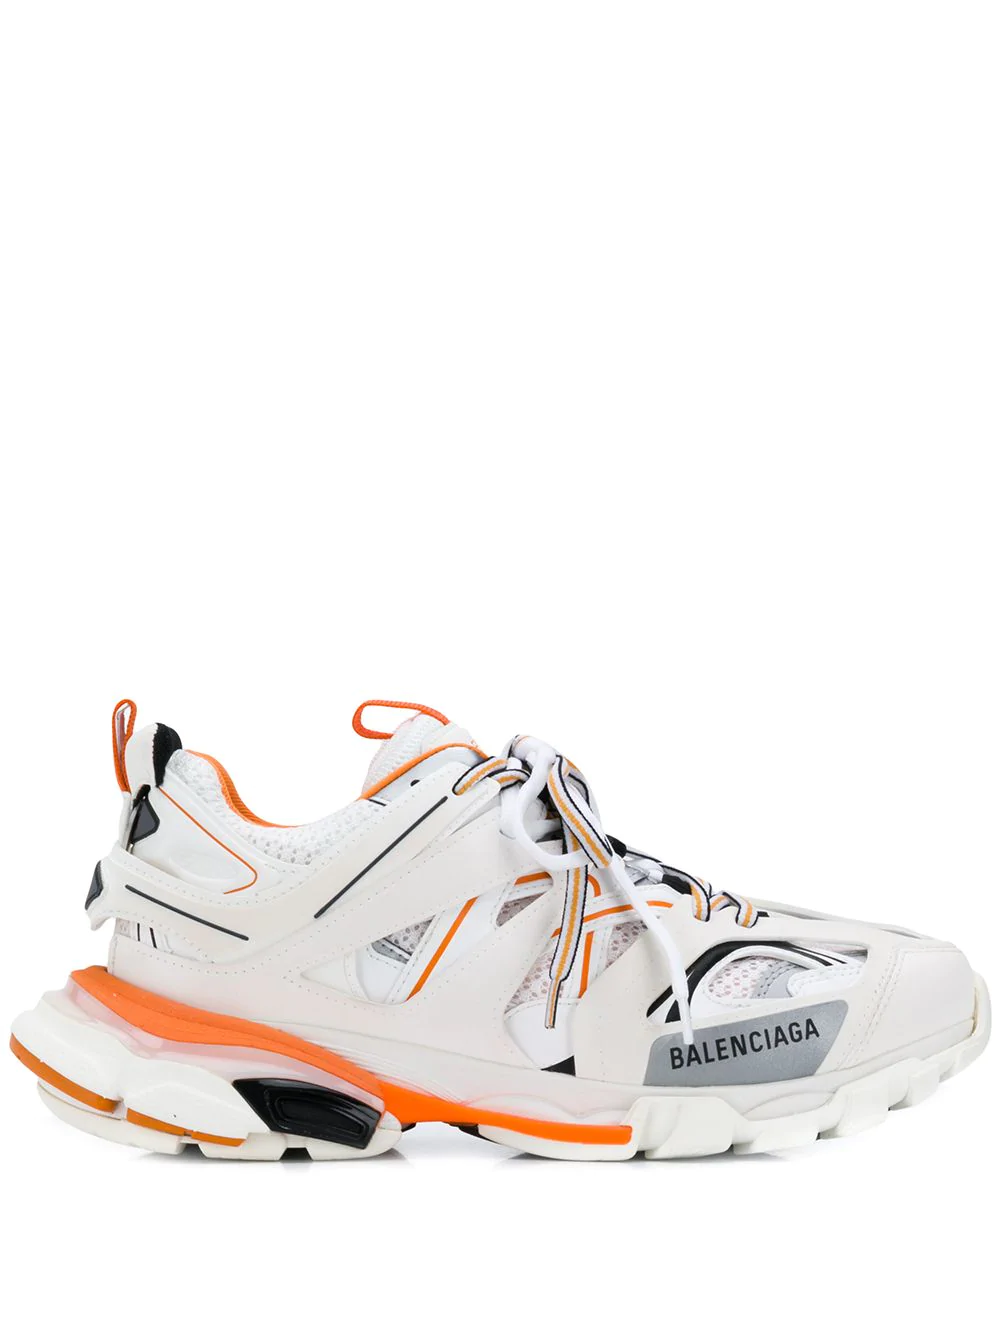 Balenciaga White Track Trainers for Women of Jess Hunt on